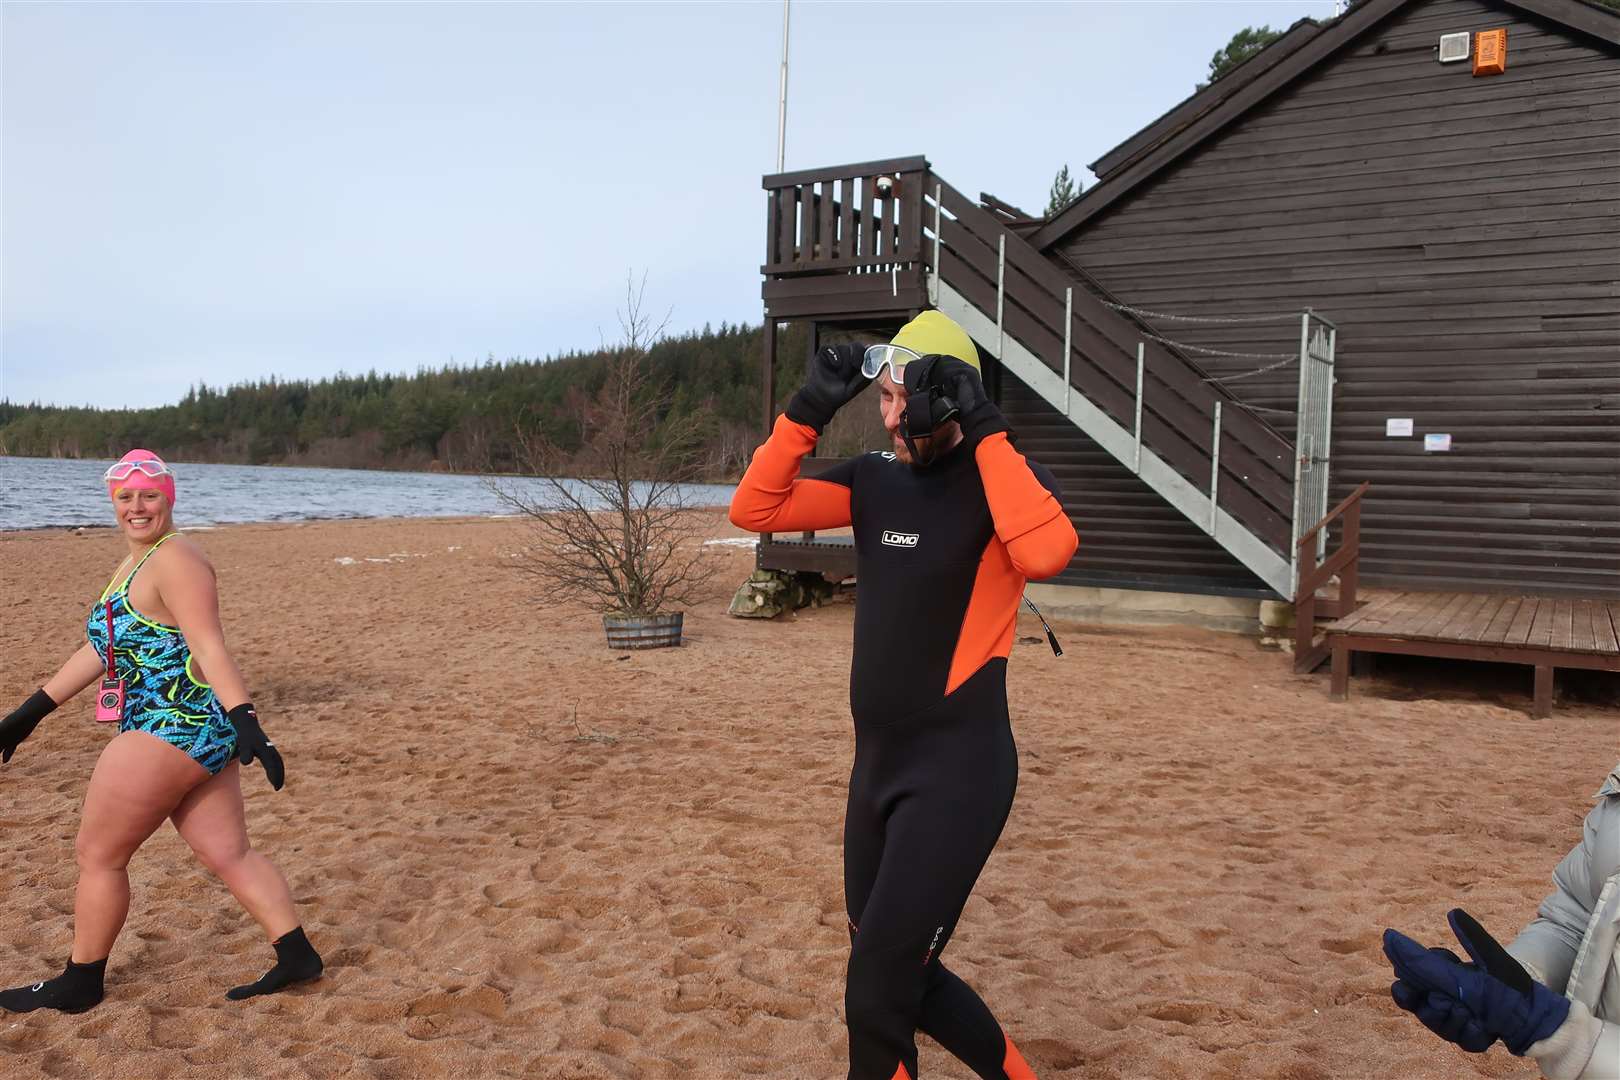 John prepares for the water ont he beach at Loch Morlich, with Alice Goodridge (left).